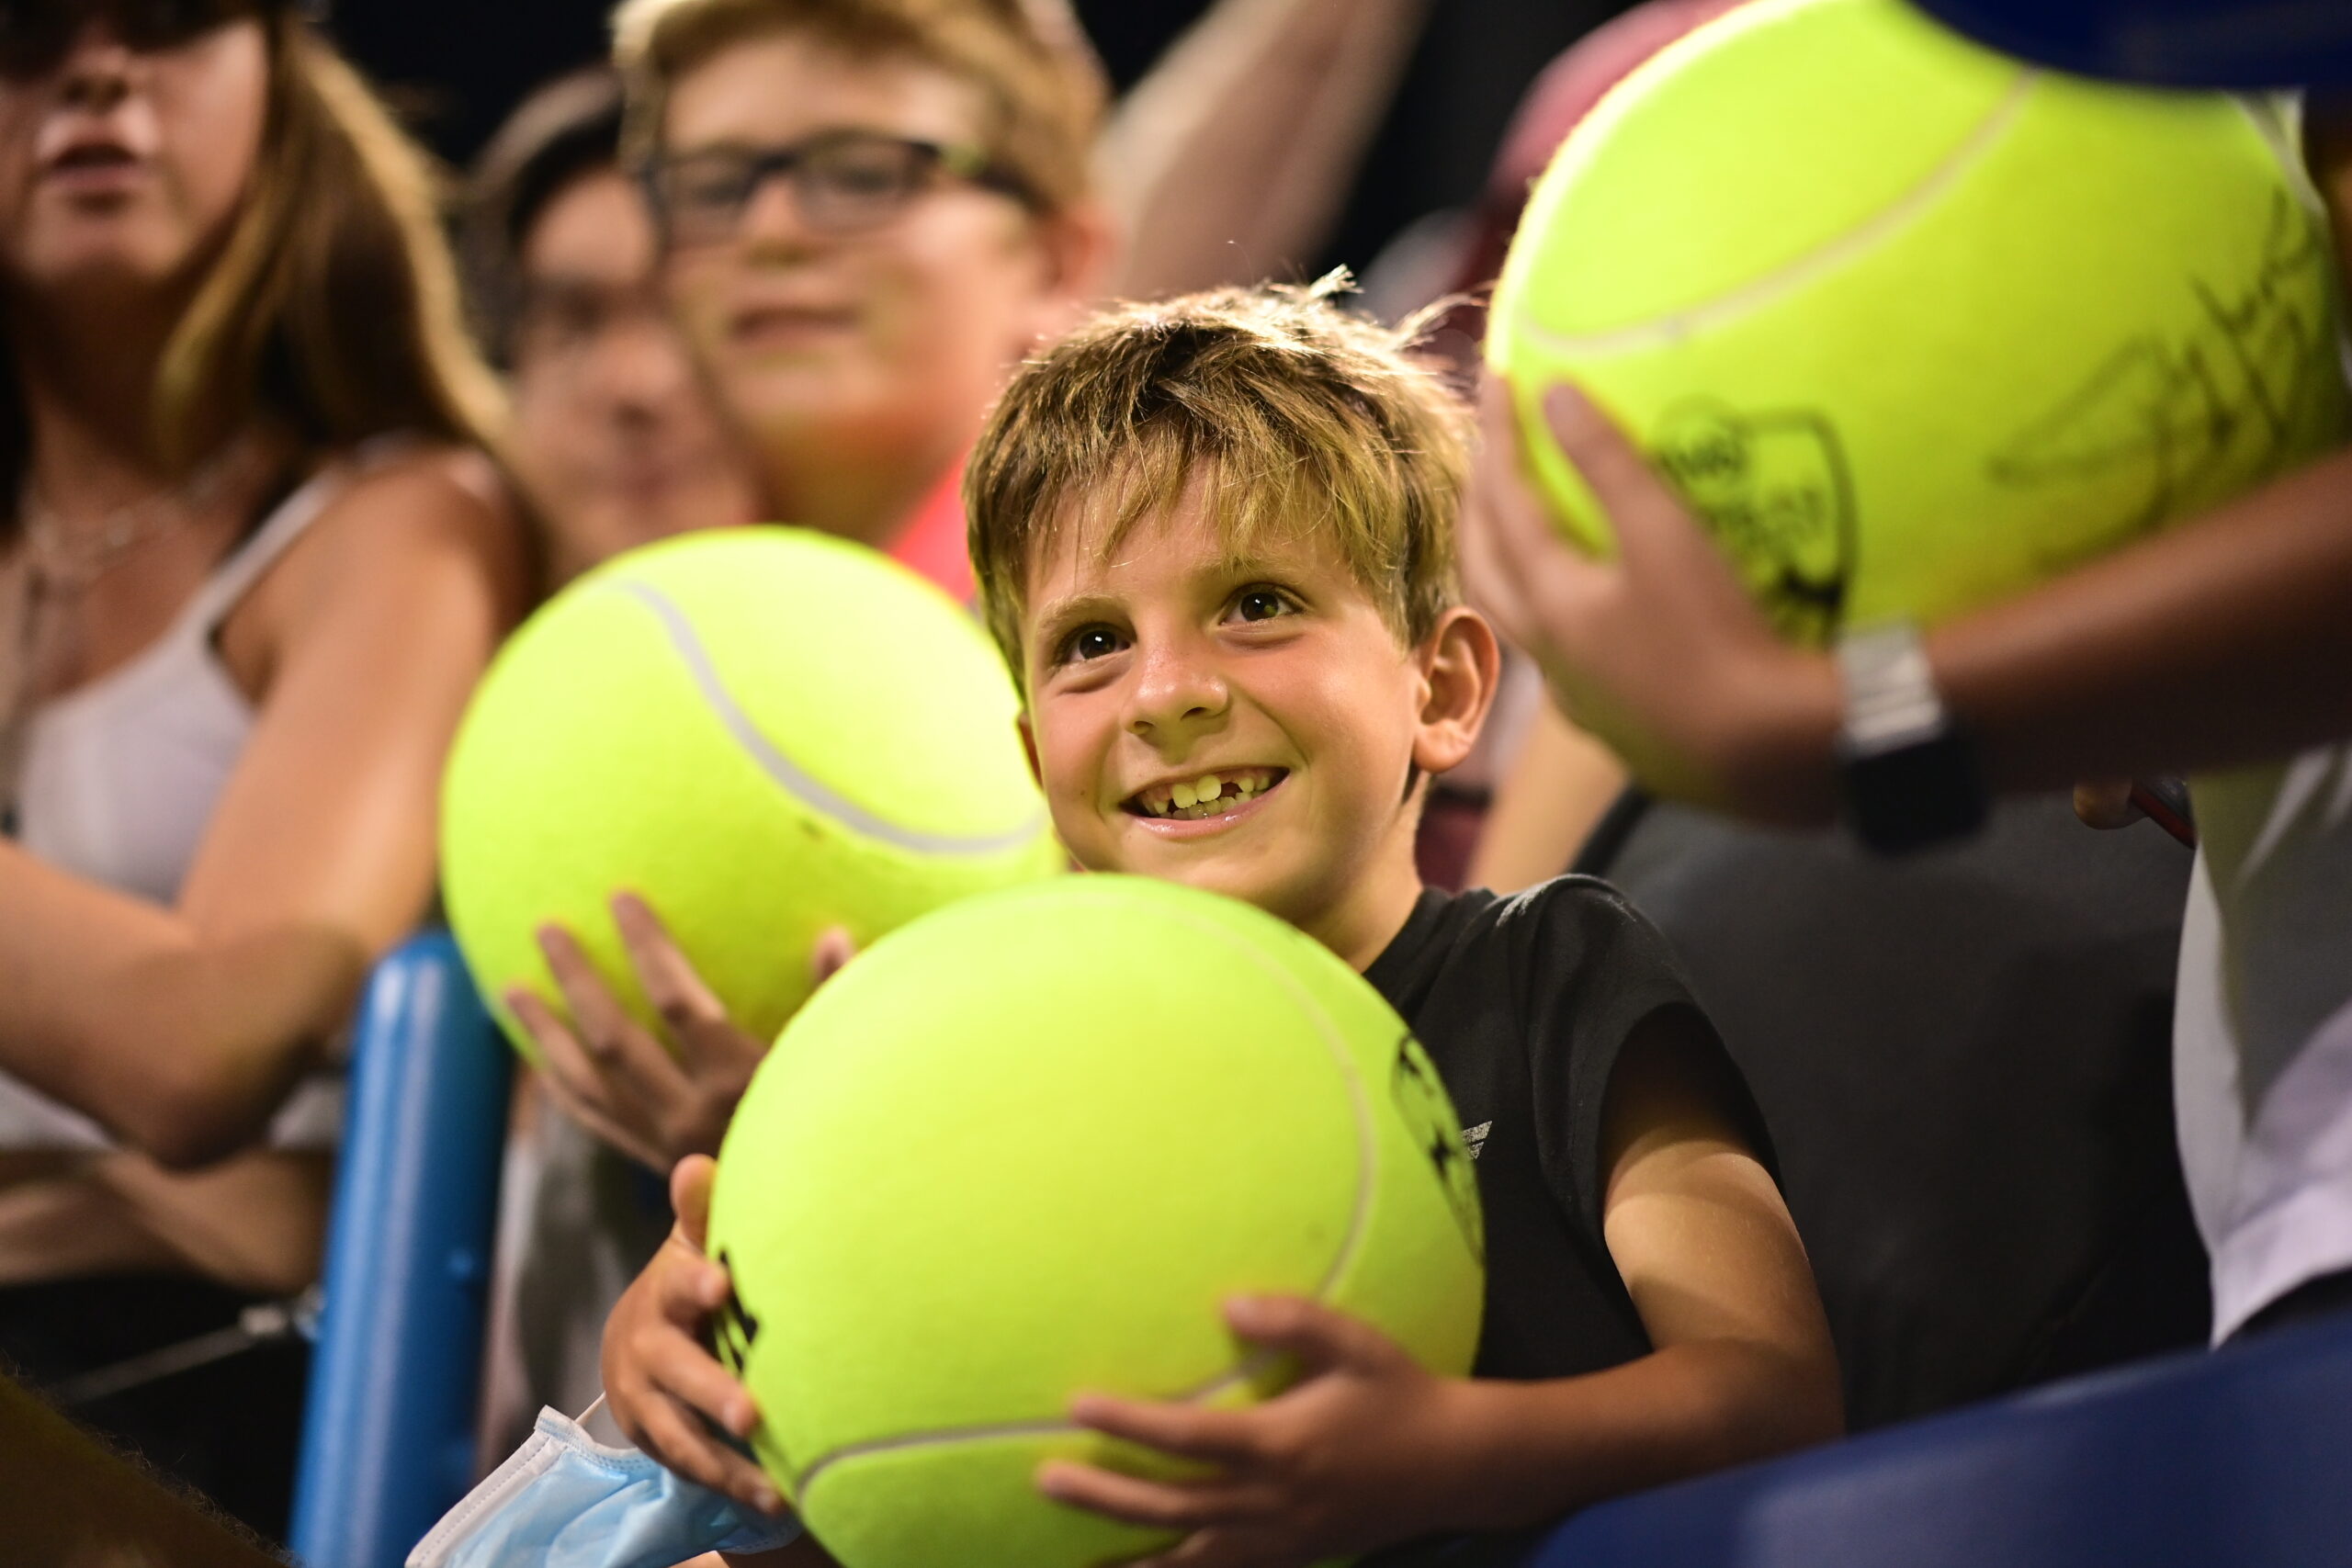 A child holding a large novelty tennis ball and smiling